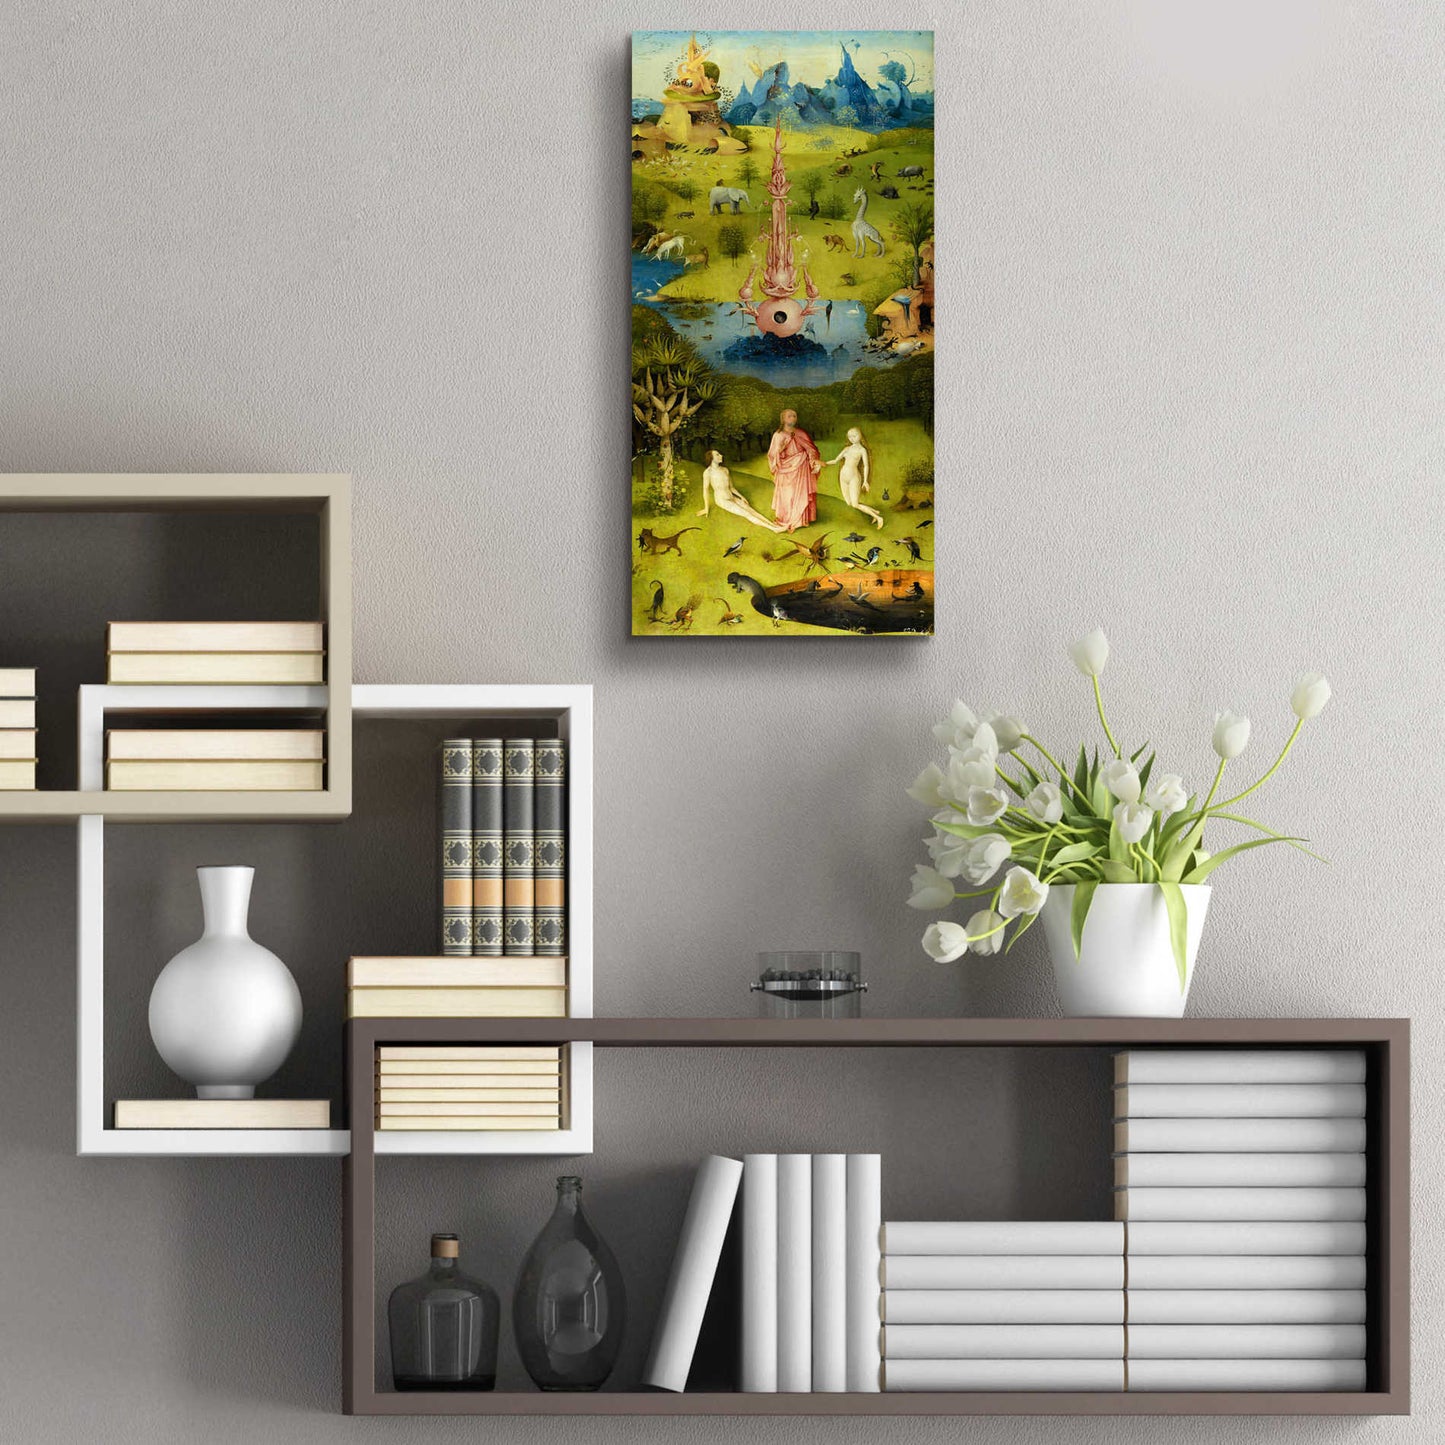 Epic Art 'The Garden of Earthly Delights - Left Panel' by Hieronymus Bosch, Acrylic Glass Wall Art,12x24